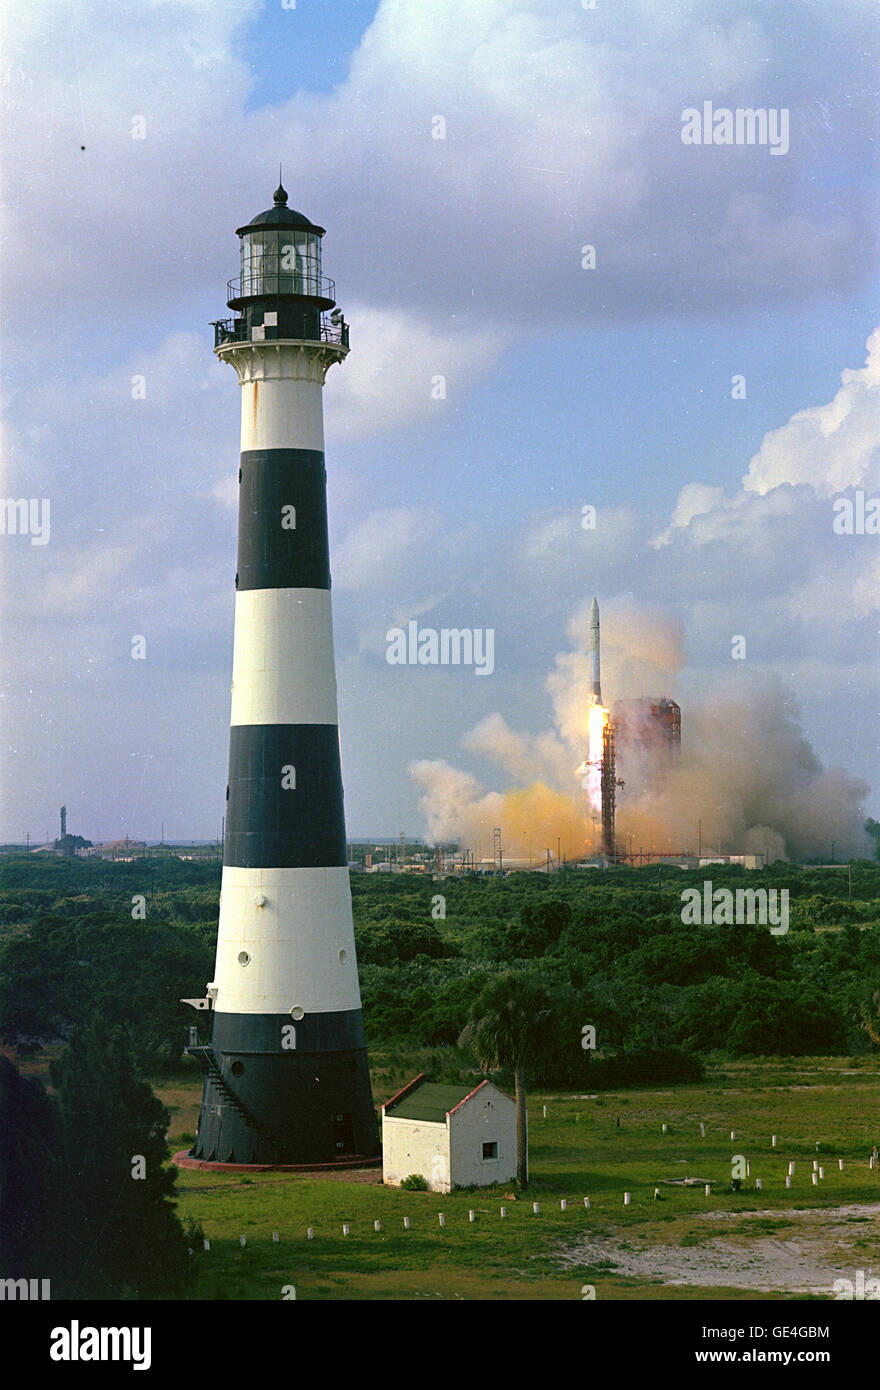 An Atlas-Centaur space vehicle lifted off at 5:53 p.m. EDT, June 13, 1972, from Complex 36B carrying an Intelsat Communications Satellite, (Intelsat IV-F5) into Earth orbit. Visible in the foreground is the lighthouse located at Cape Canaveral Air Force Station.  Image #:  Date: June 13, 1972 Stock Photo